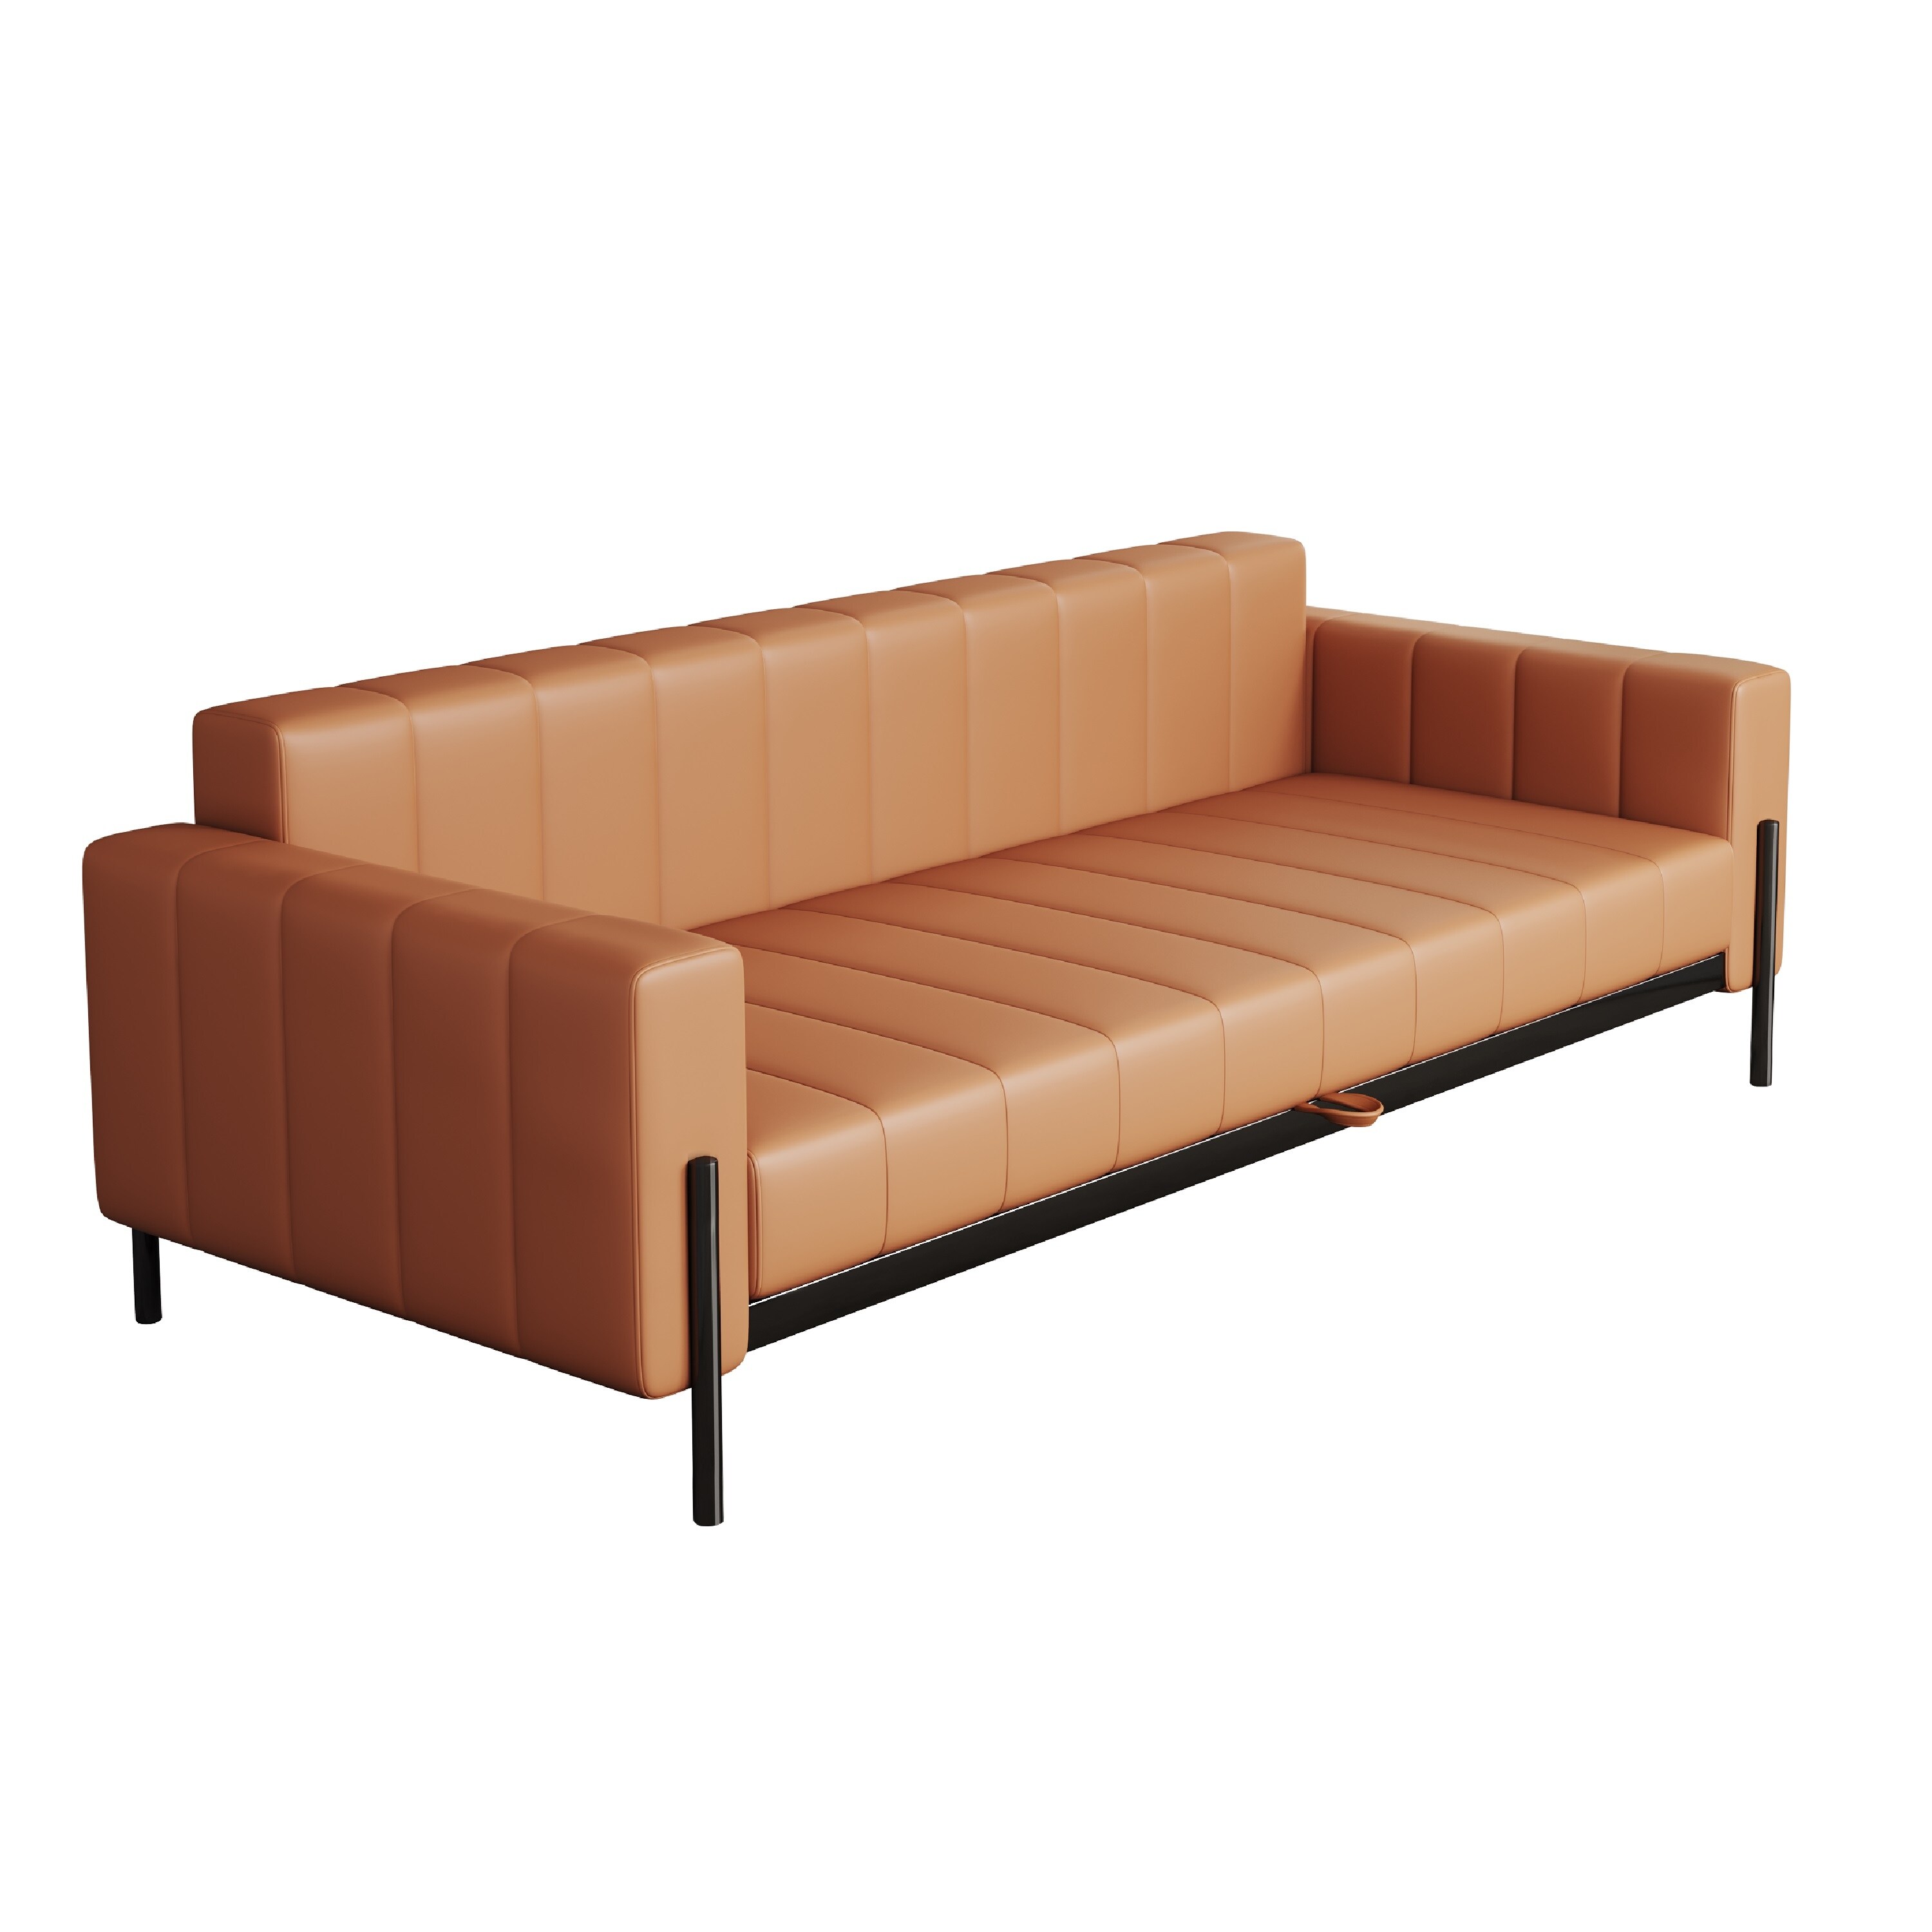 JASIWAY Morden Square Arm Leather Loveseat Sofa Bed,Brown